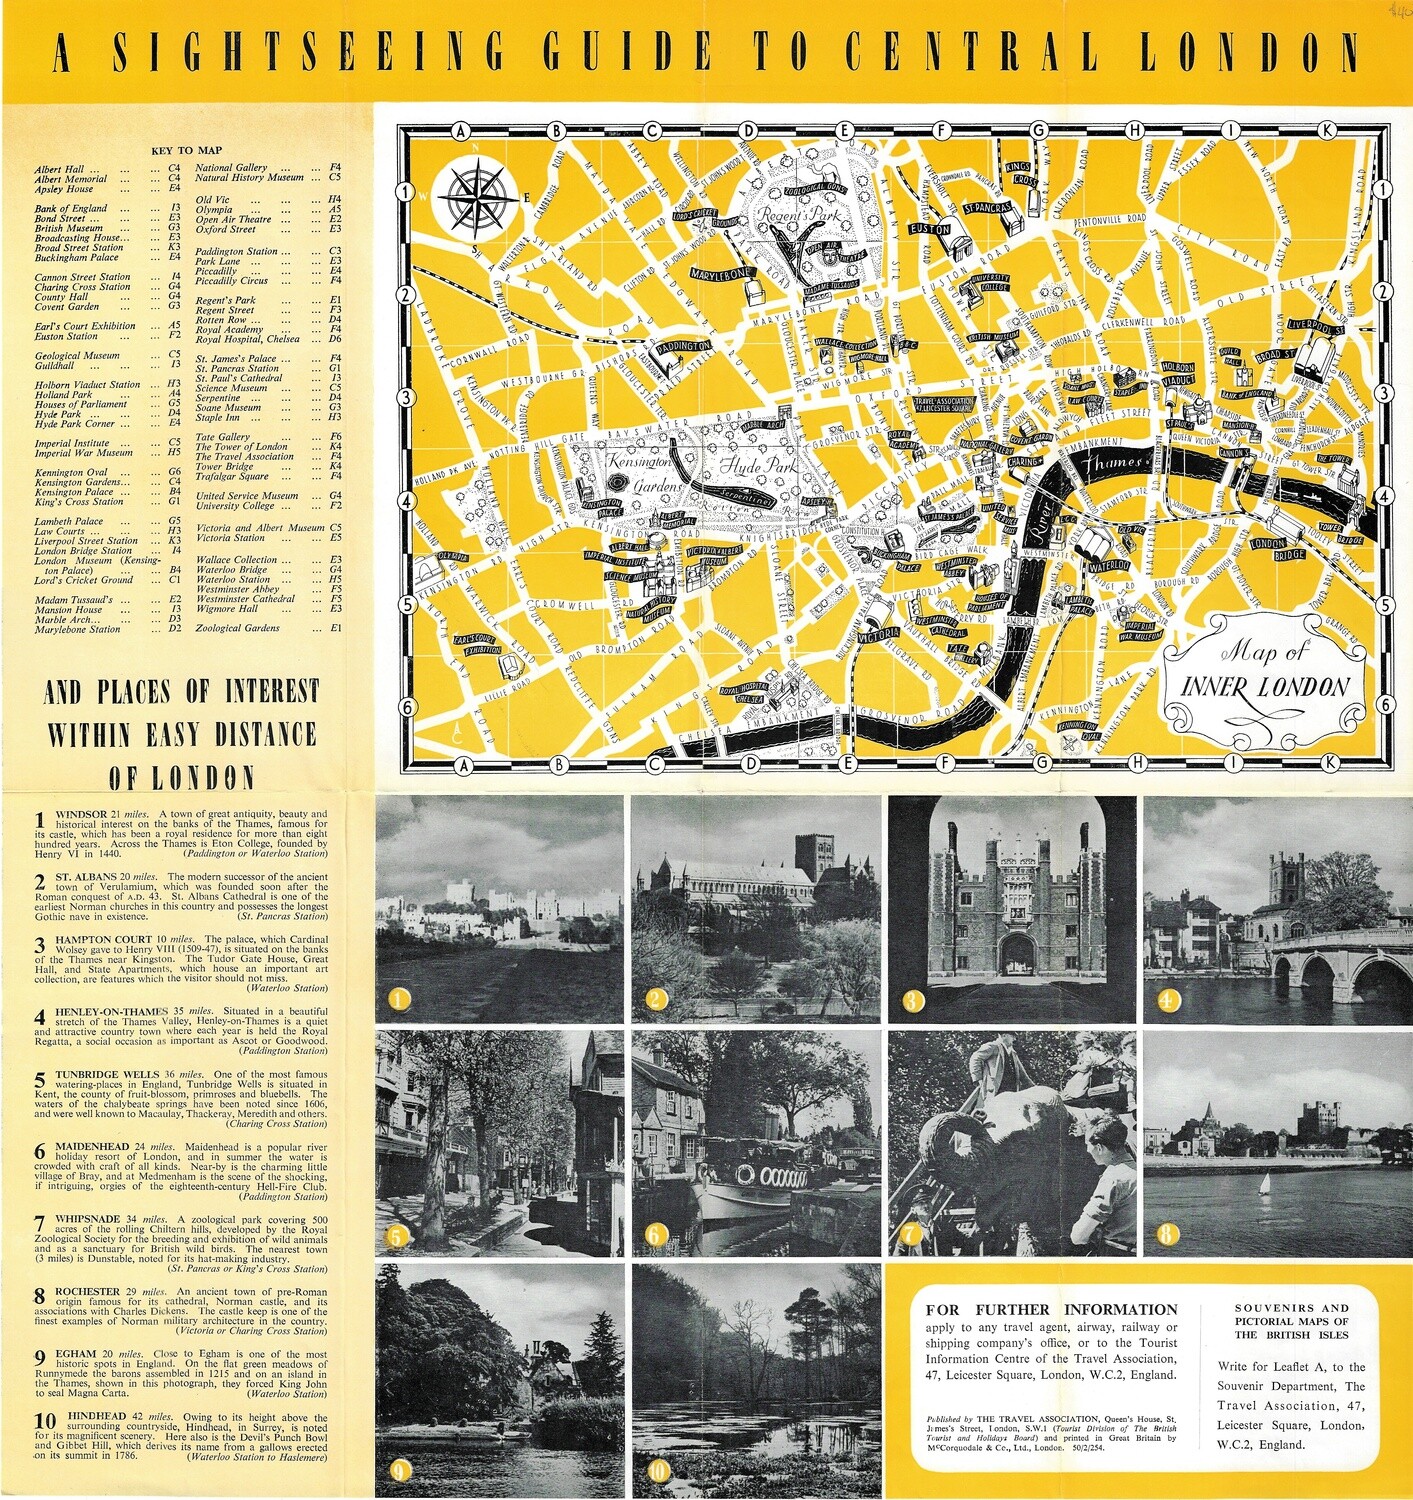 1950 Central London Sightseeing Guide